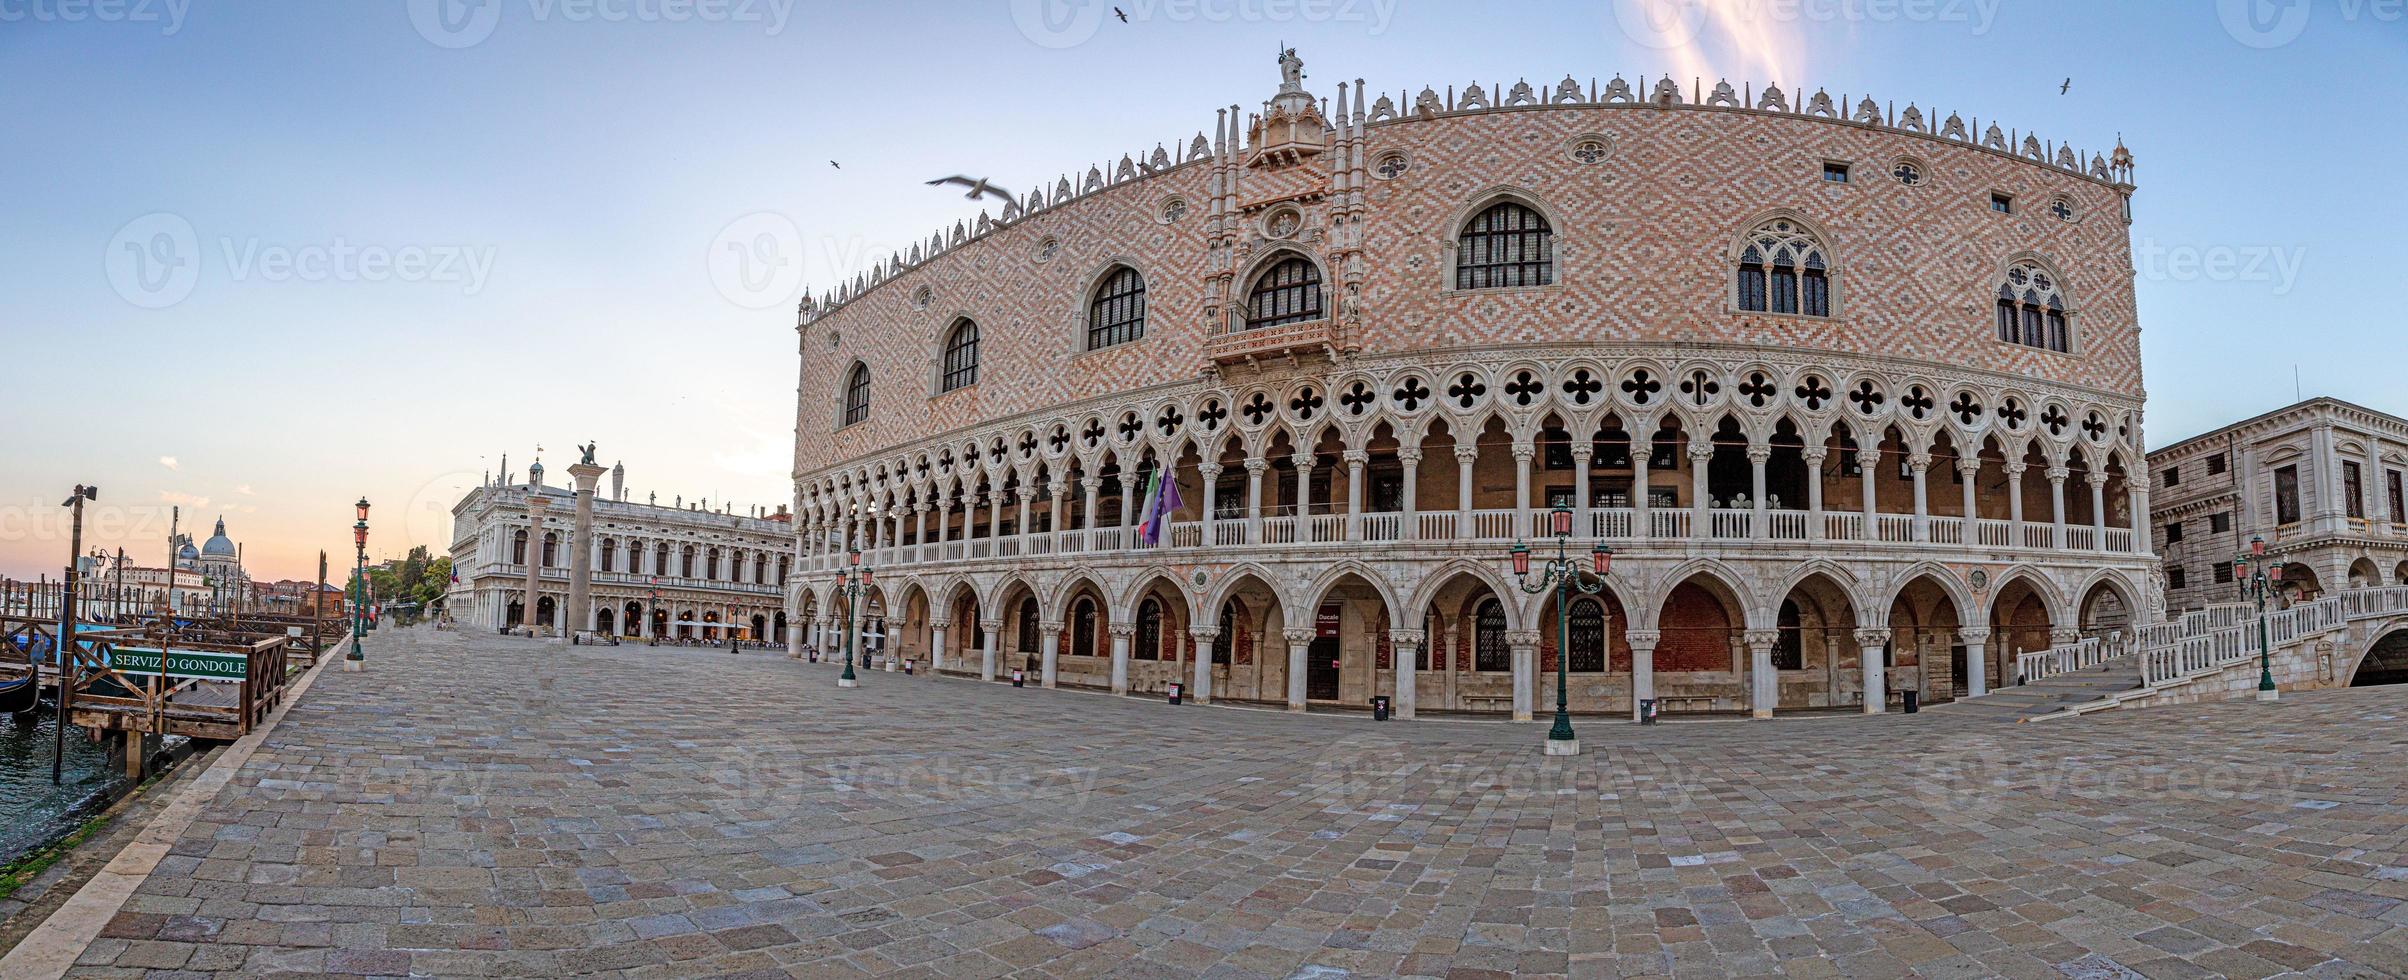 Picture of square in front of doge palace in Venice without visitors in Covid-19 season photo